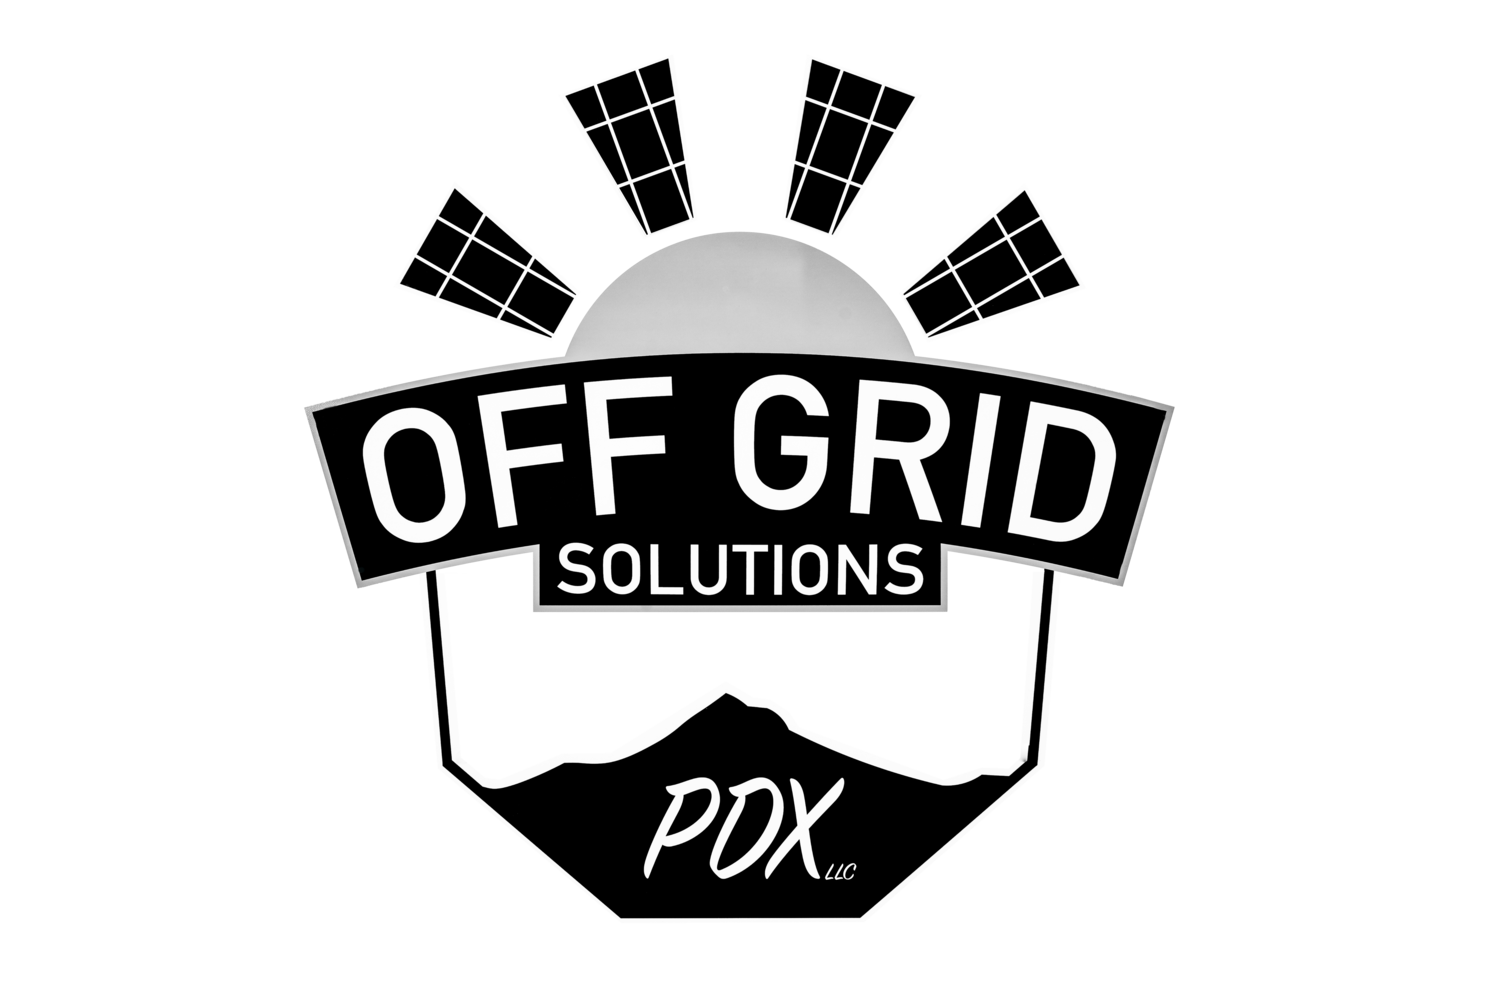 Off Grid Solutions PDX. Your off grid solar experts